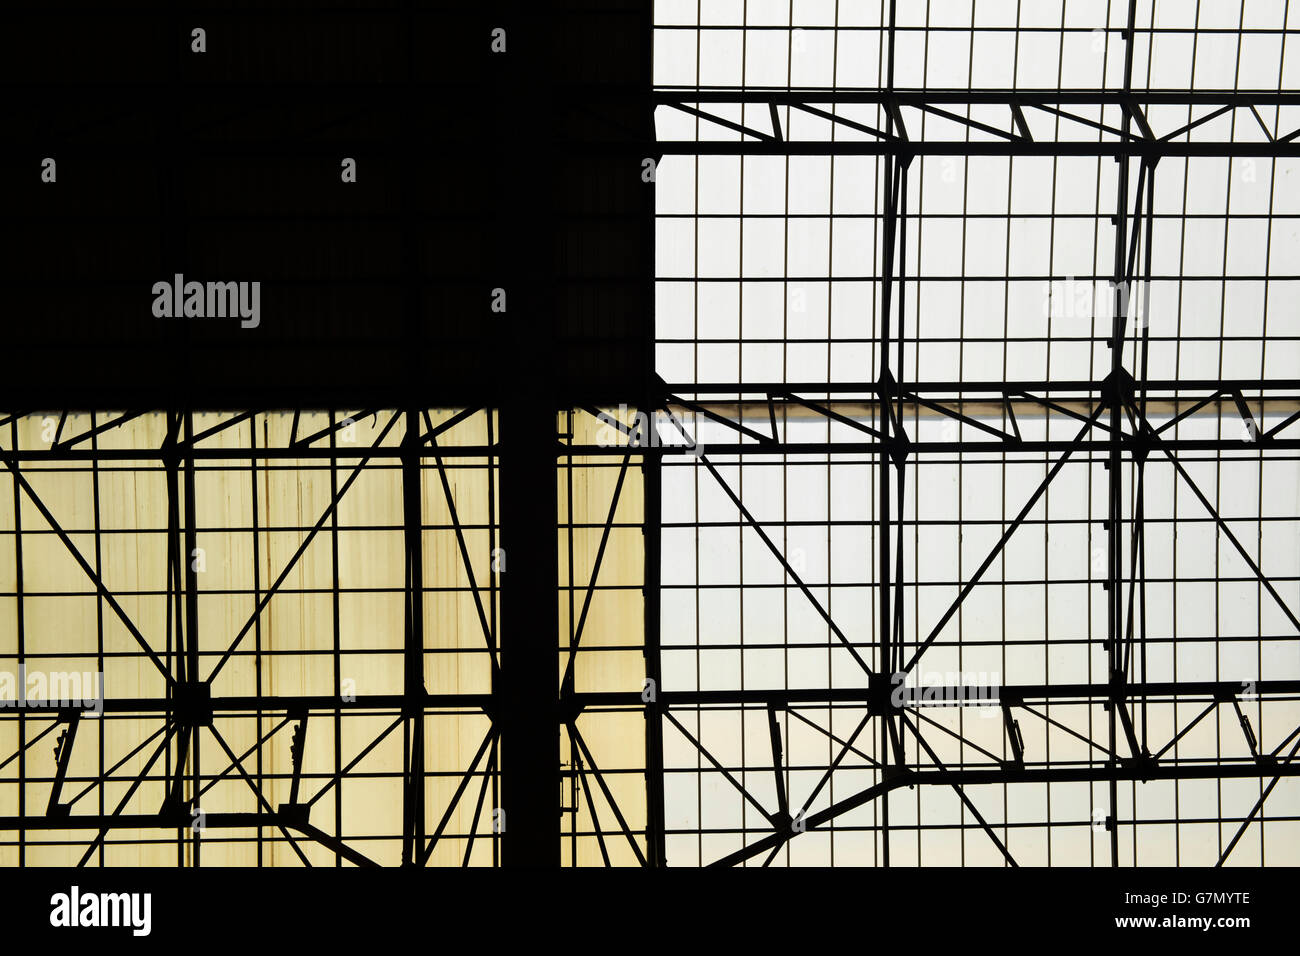 Geometric abstract architecture from the roof of a train station. Photo taken from inside. Stock Photo